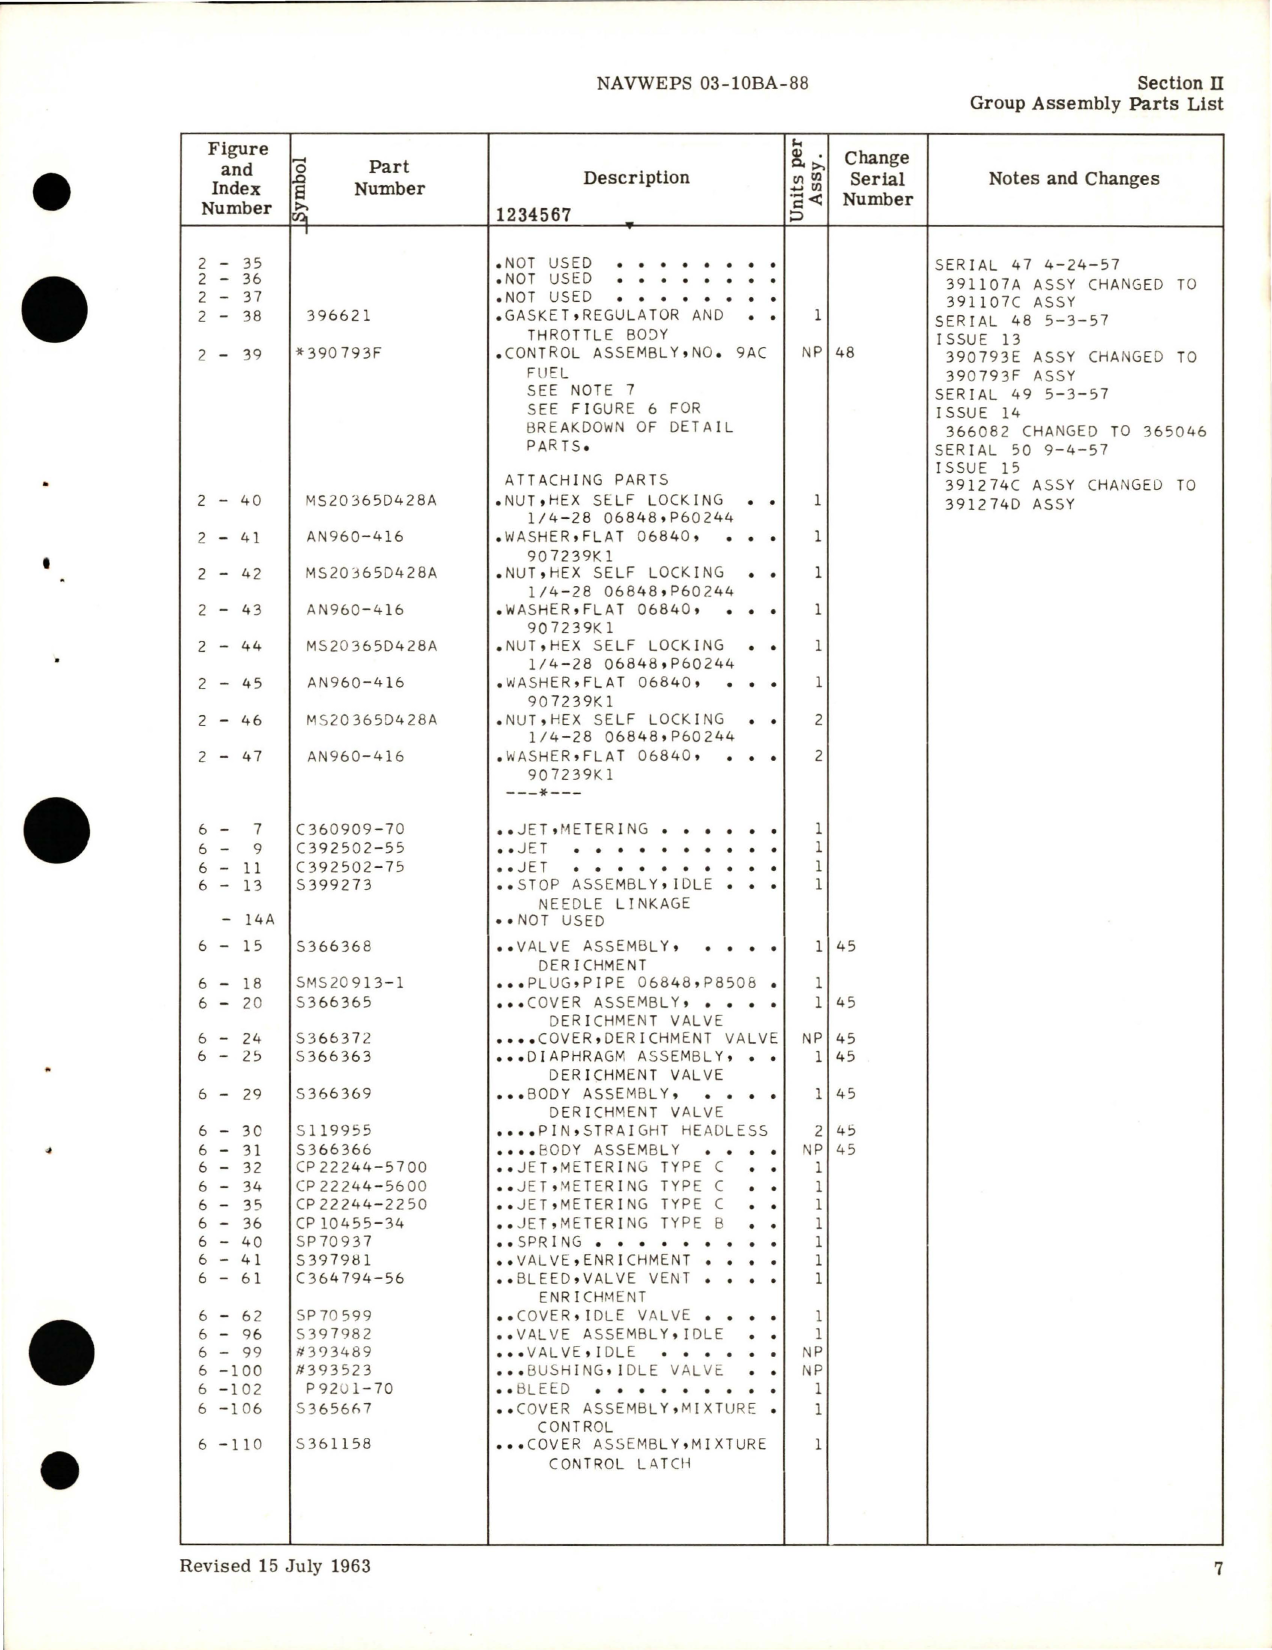 Sample page 9 from AirCorps Library document: Illustrated Parts Breakdown for Injection Carburetor - Model PR-58E5 